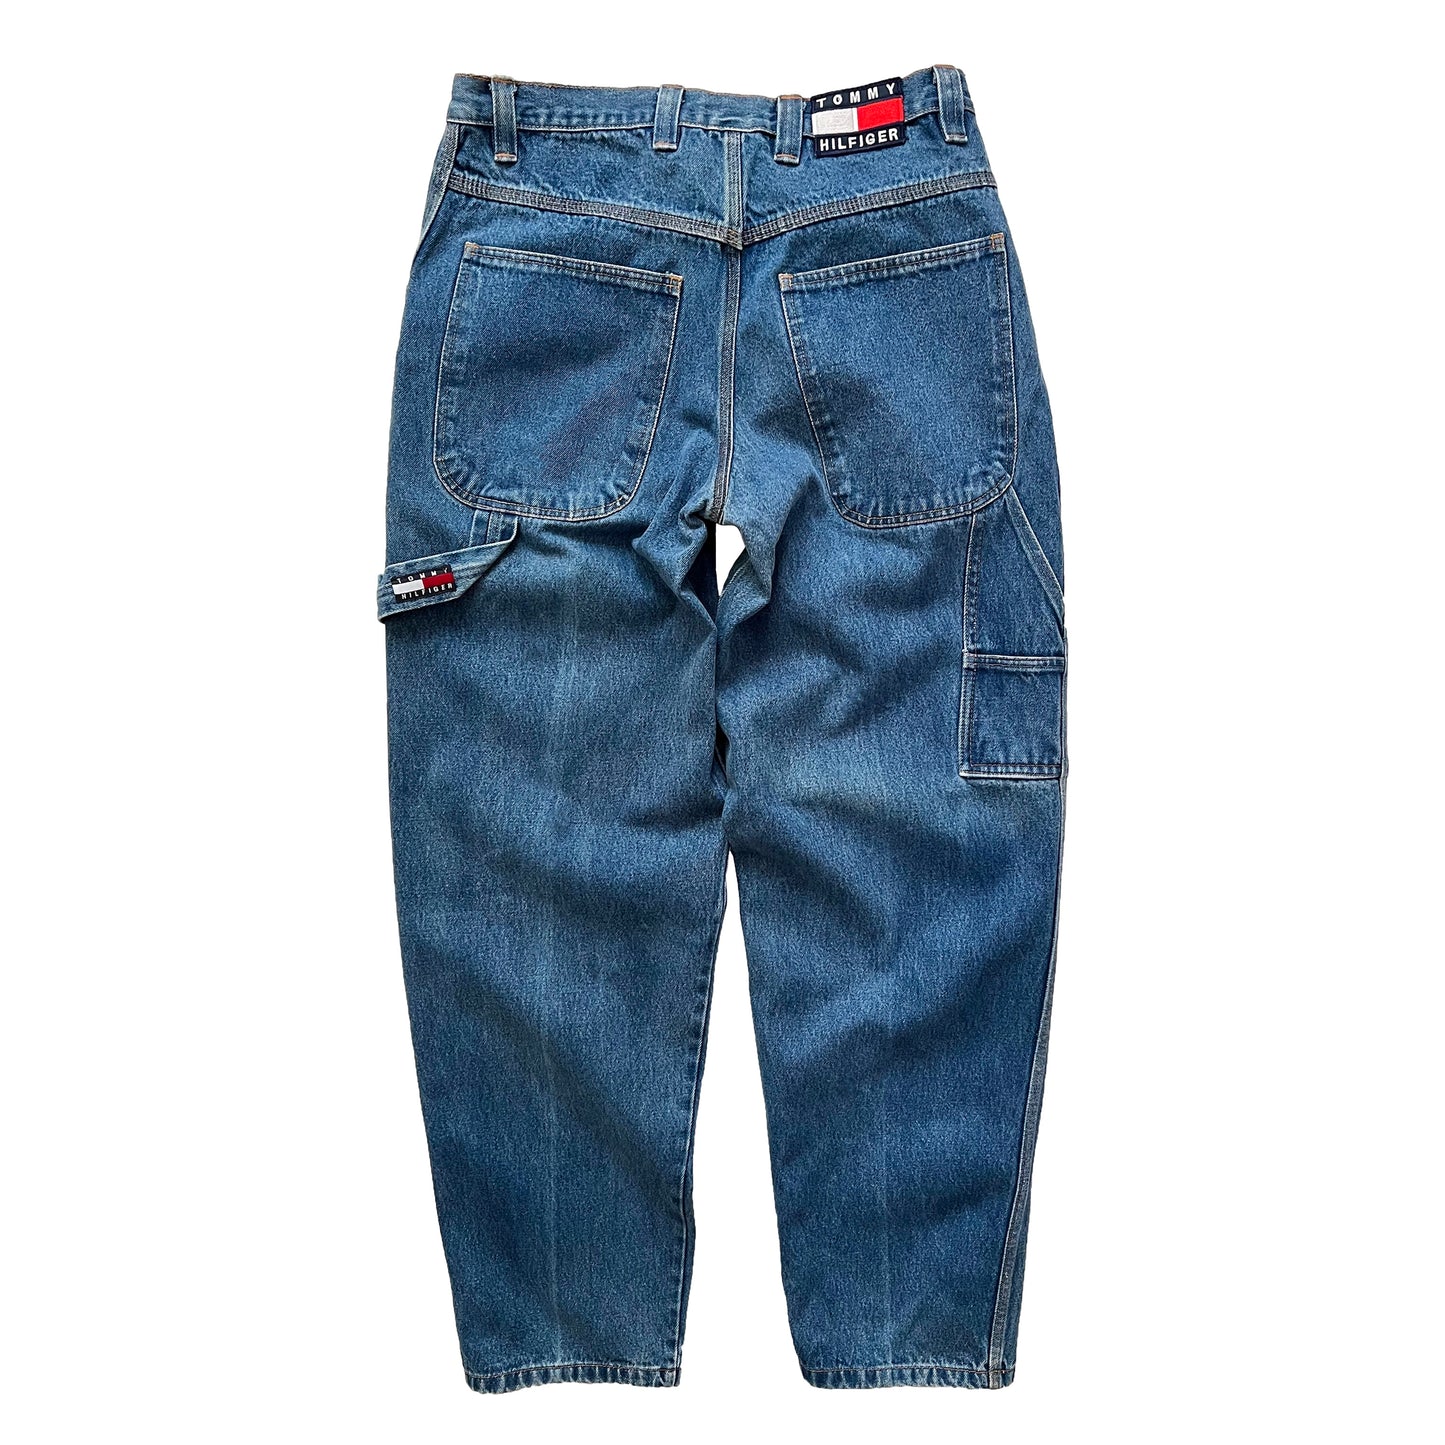 90's BOOTLEG TOMMY HILFIGER WIDE TAPERED JEANS